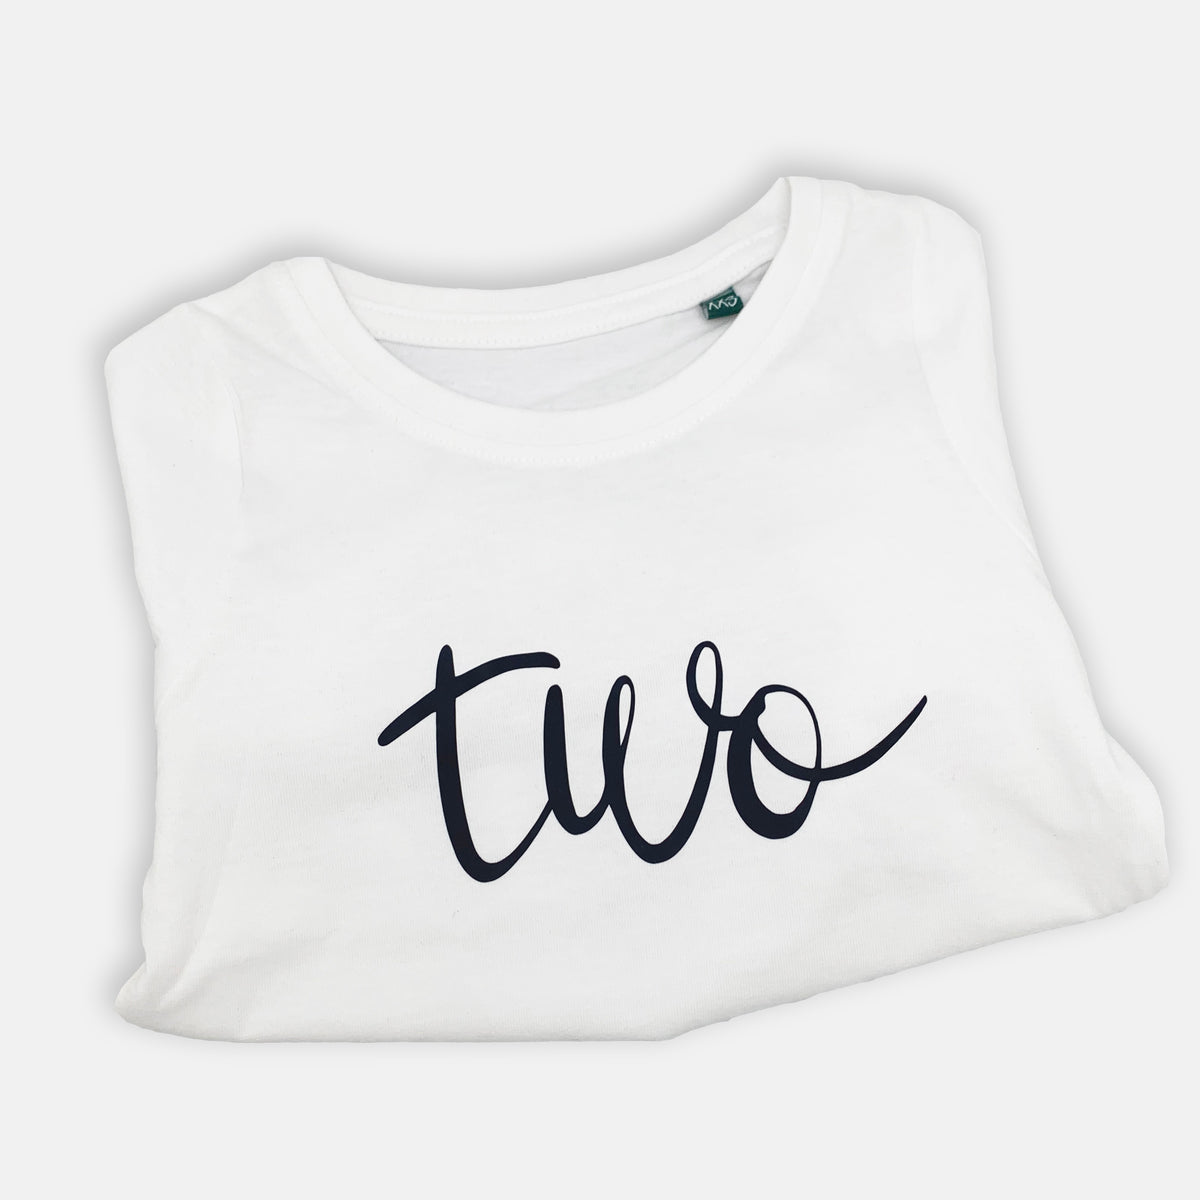 Milestone TWO T-shirt - The Perfect Birthday outfit for a TWO year old